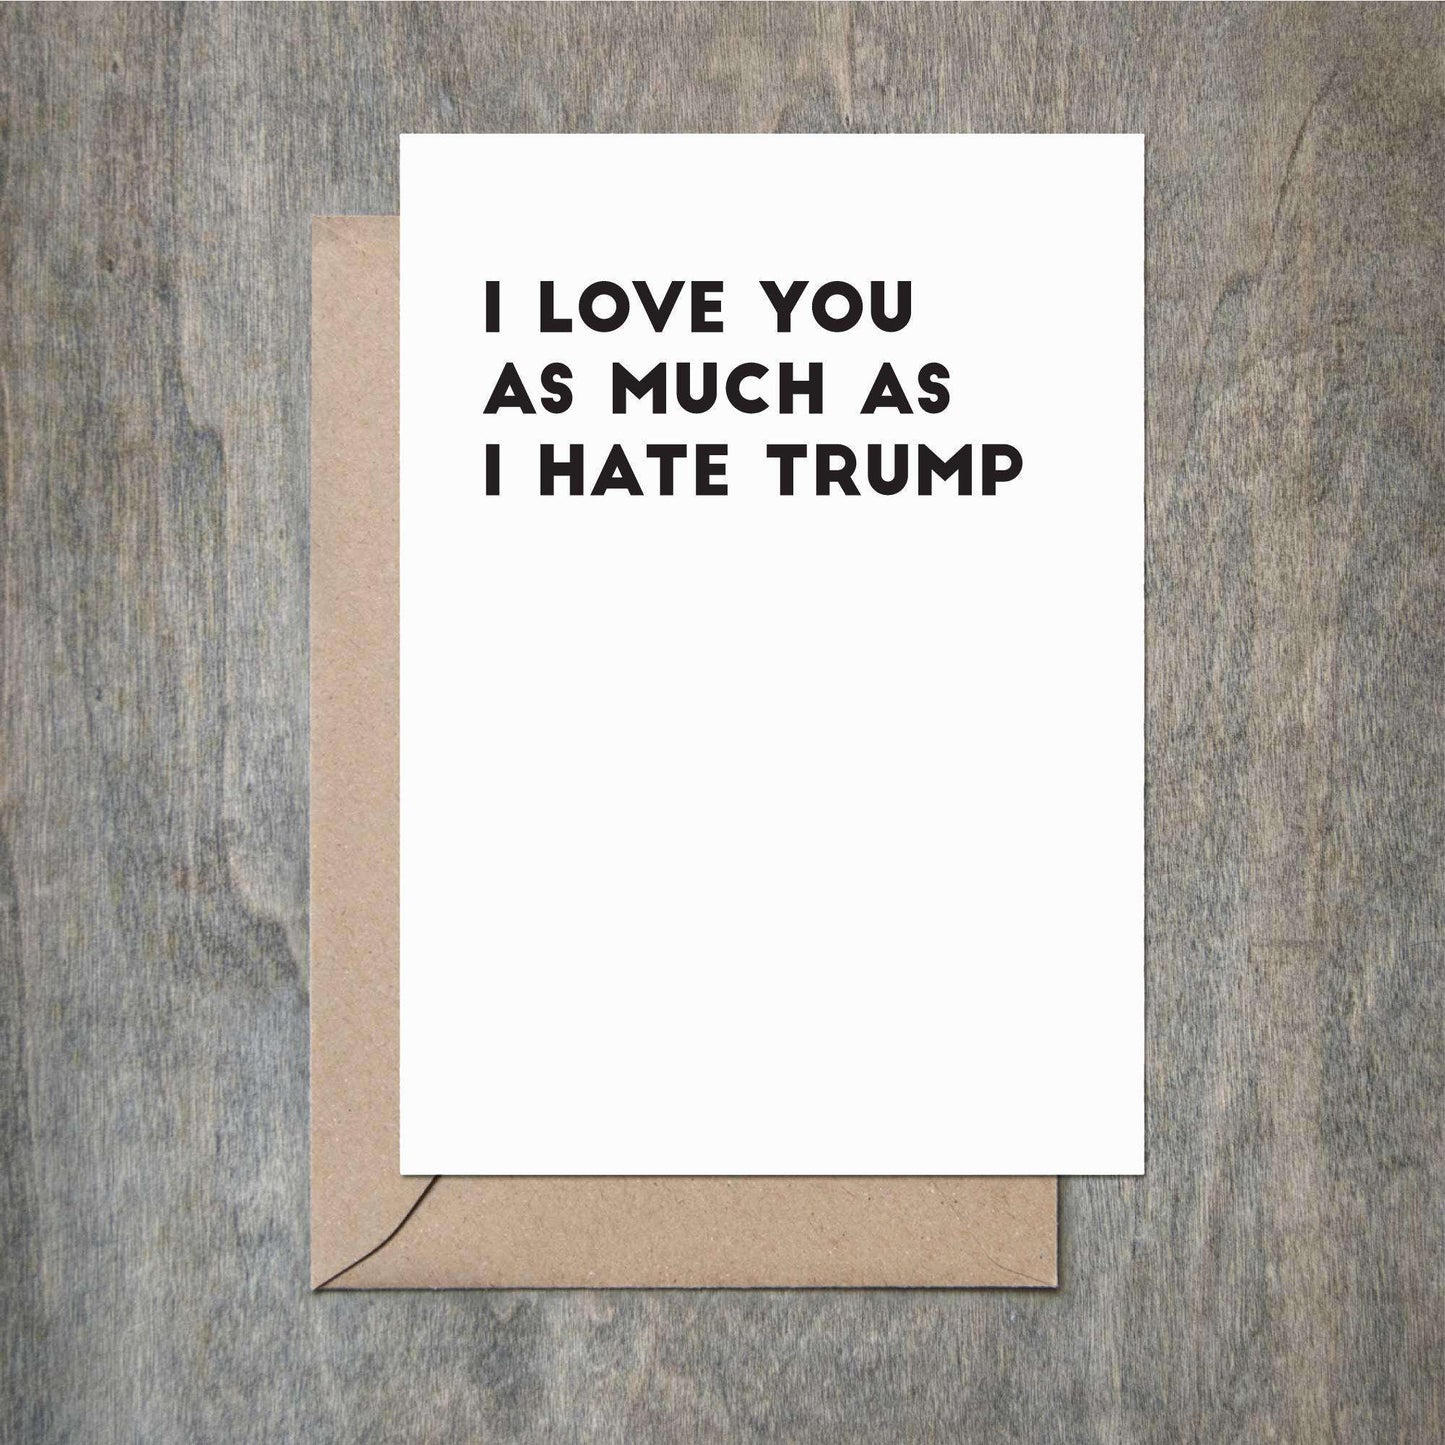 Funny Love Card I Love You As Much As I Hate Trump Funny Love Card-Love Cards-Crimson and Clover Studio